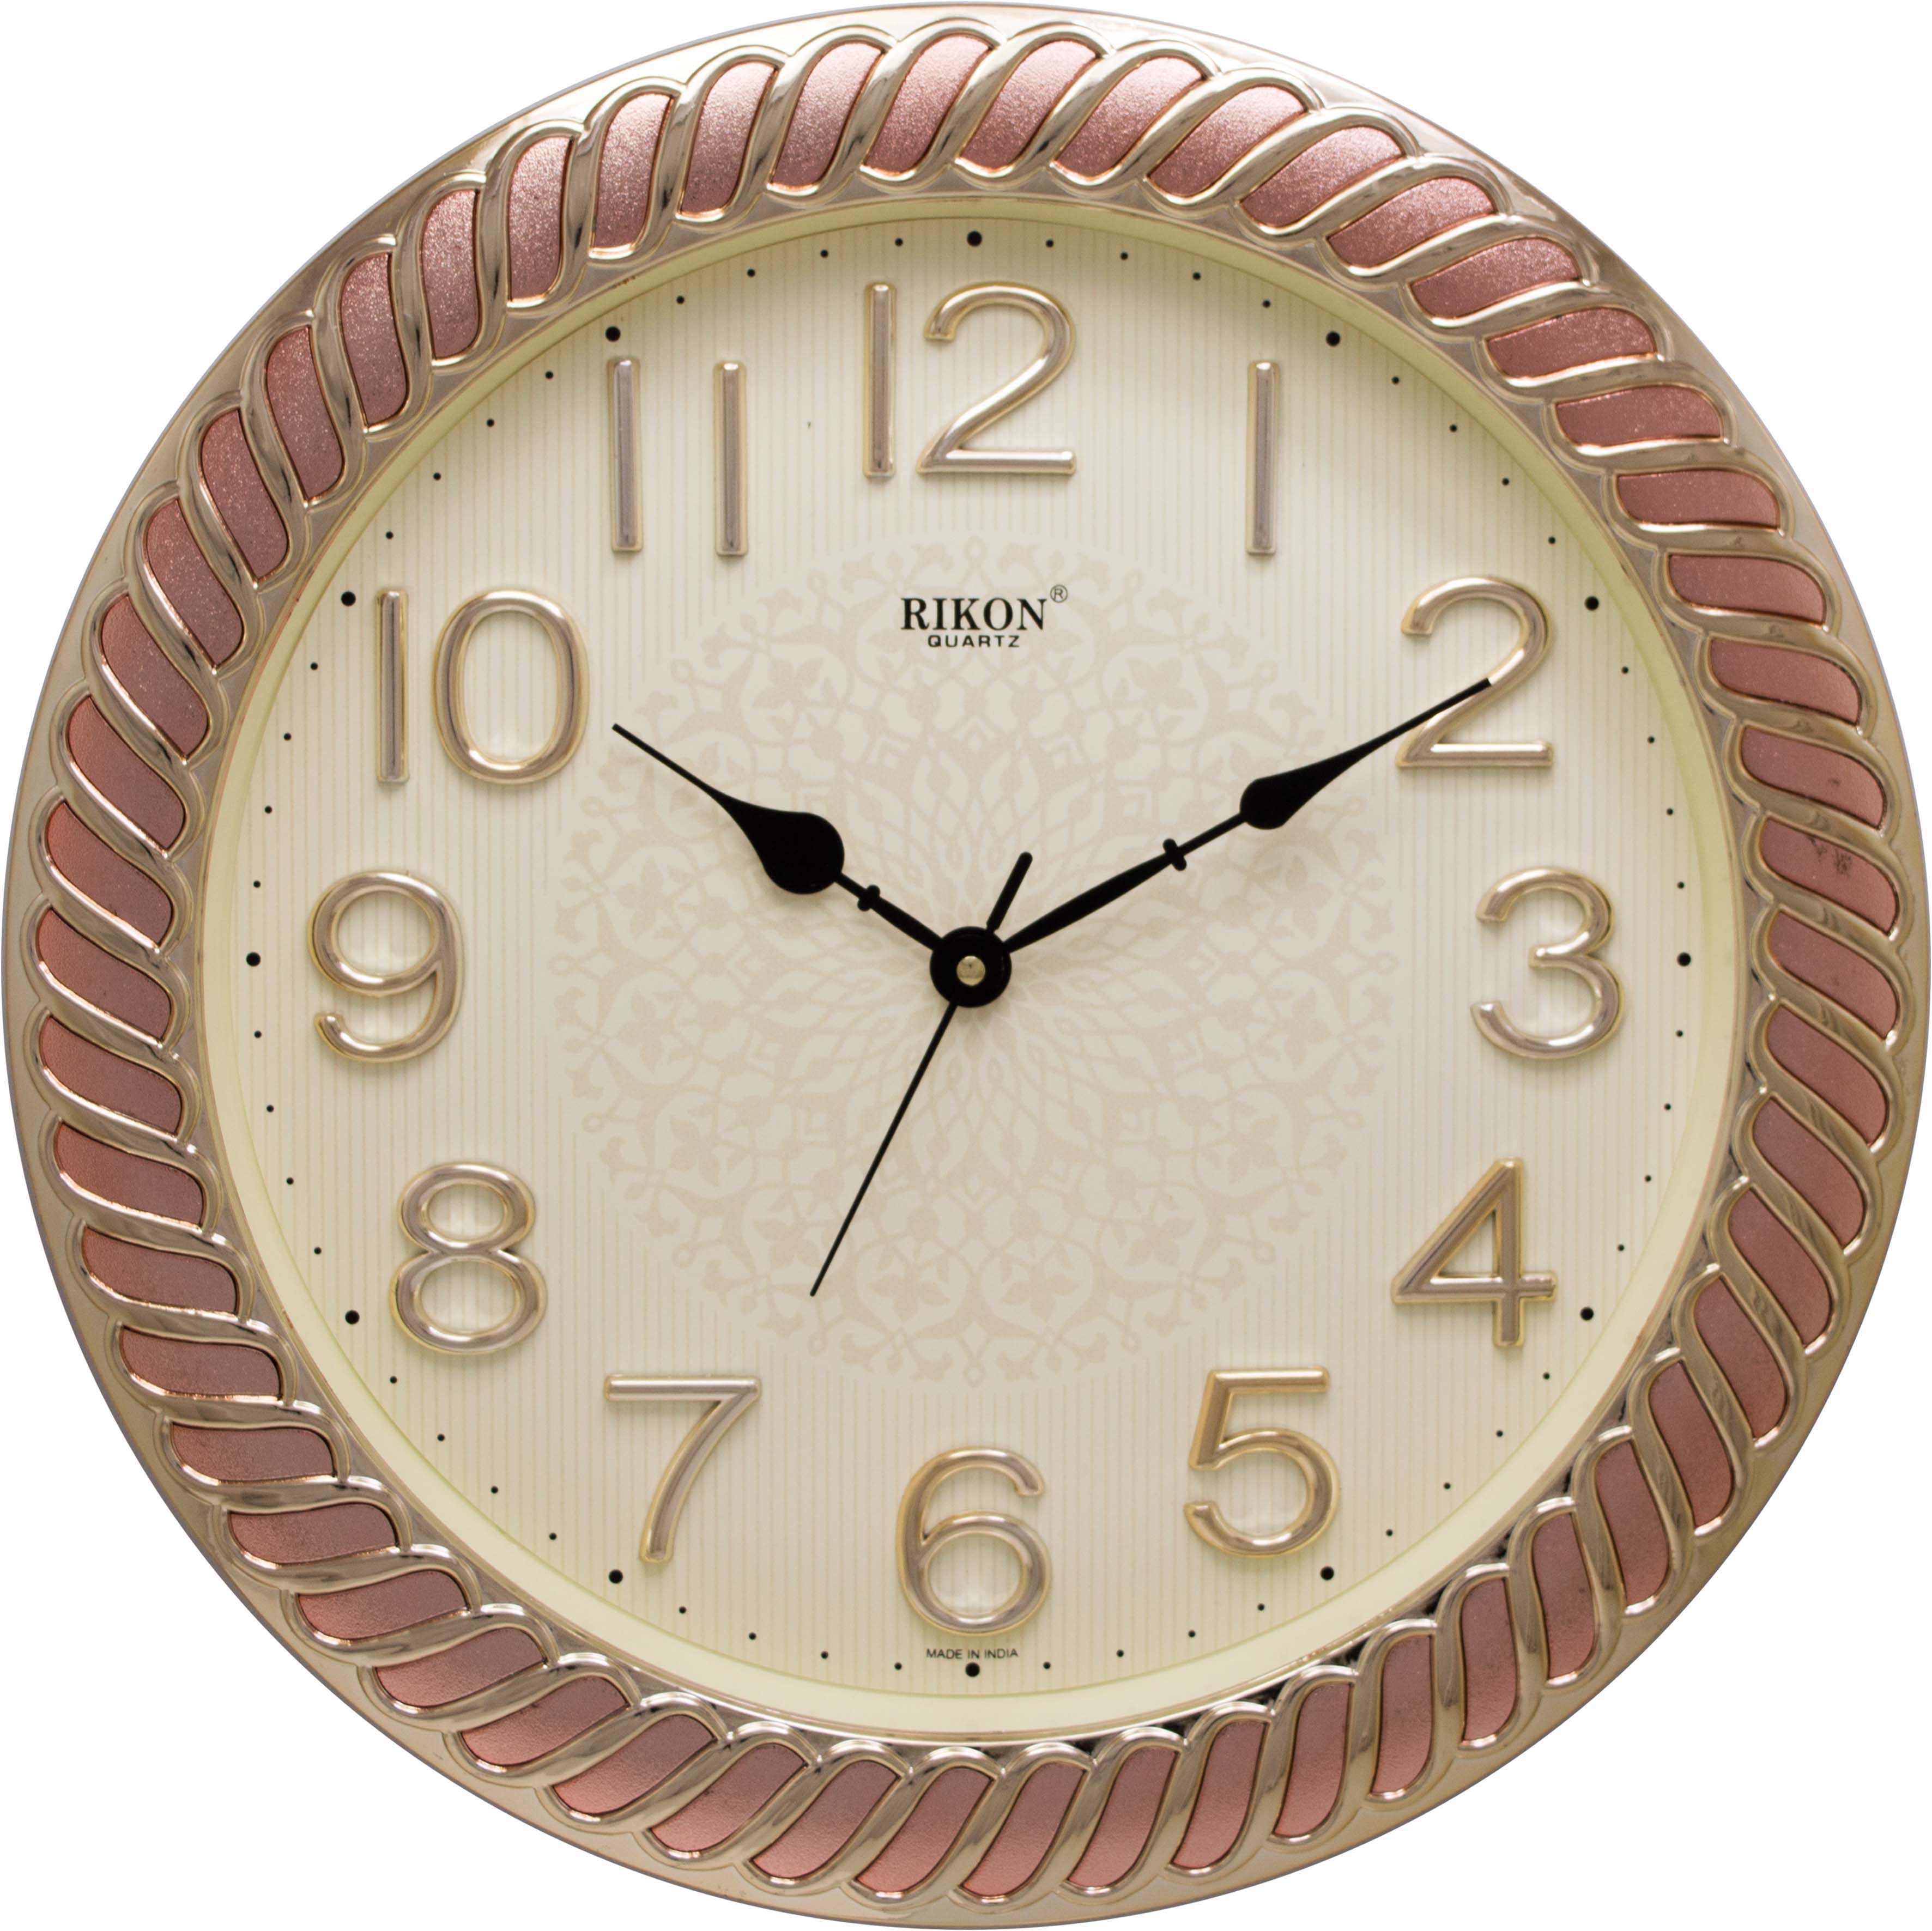 RIKON Plain Wall Clock Green [3451] in Agra at best price by Nitin Watch Co  - Justdial